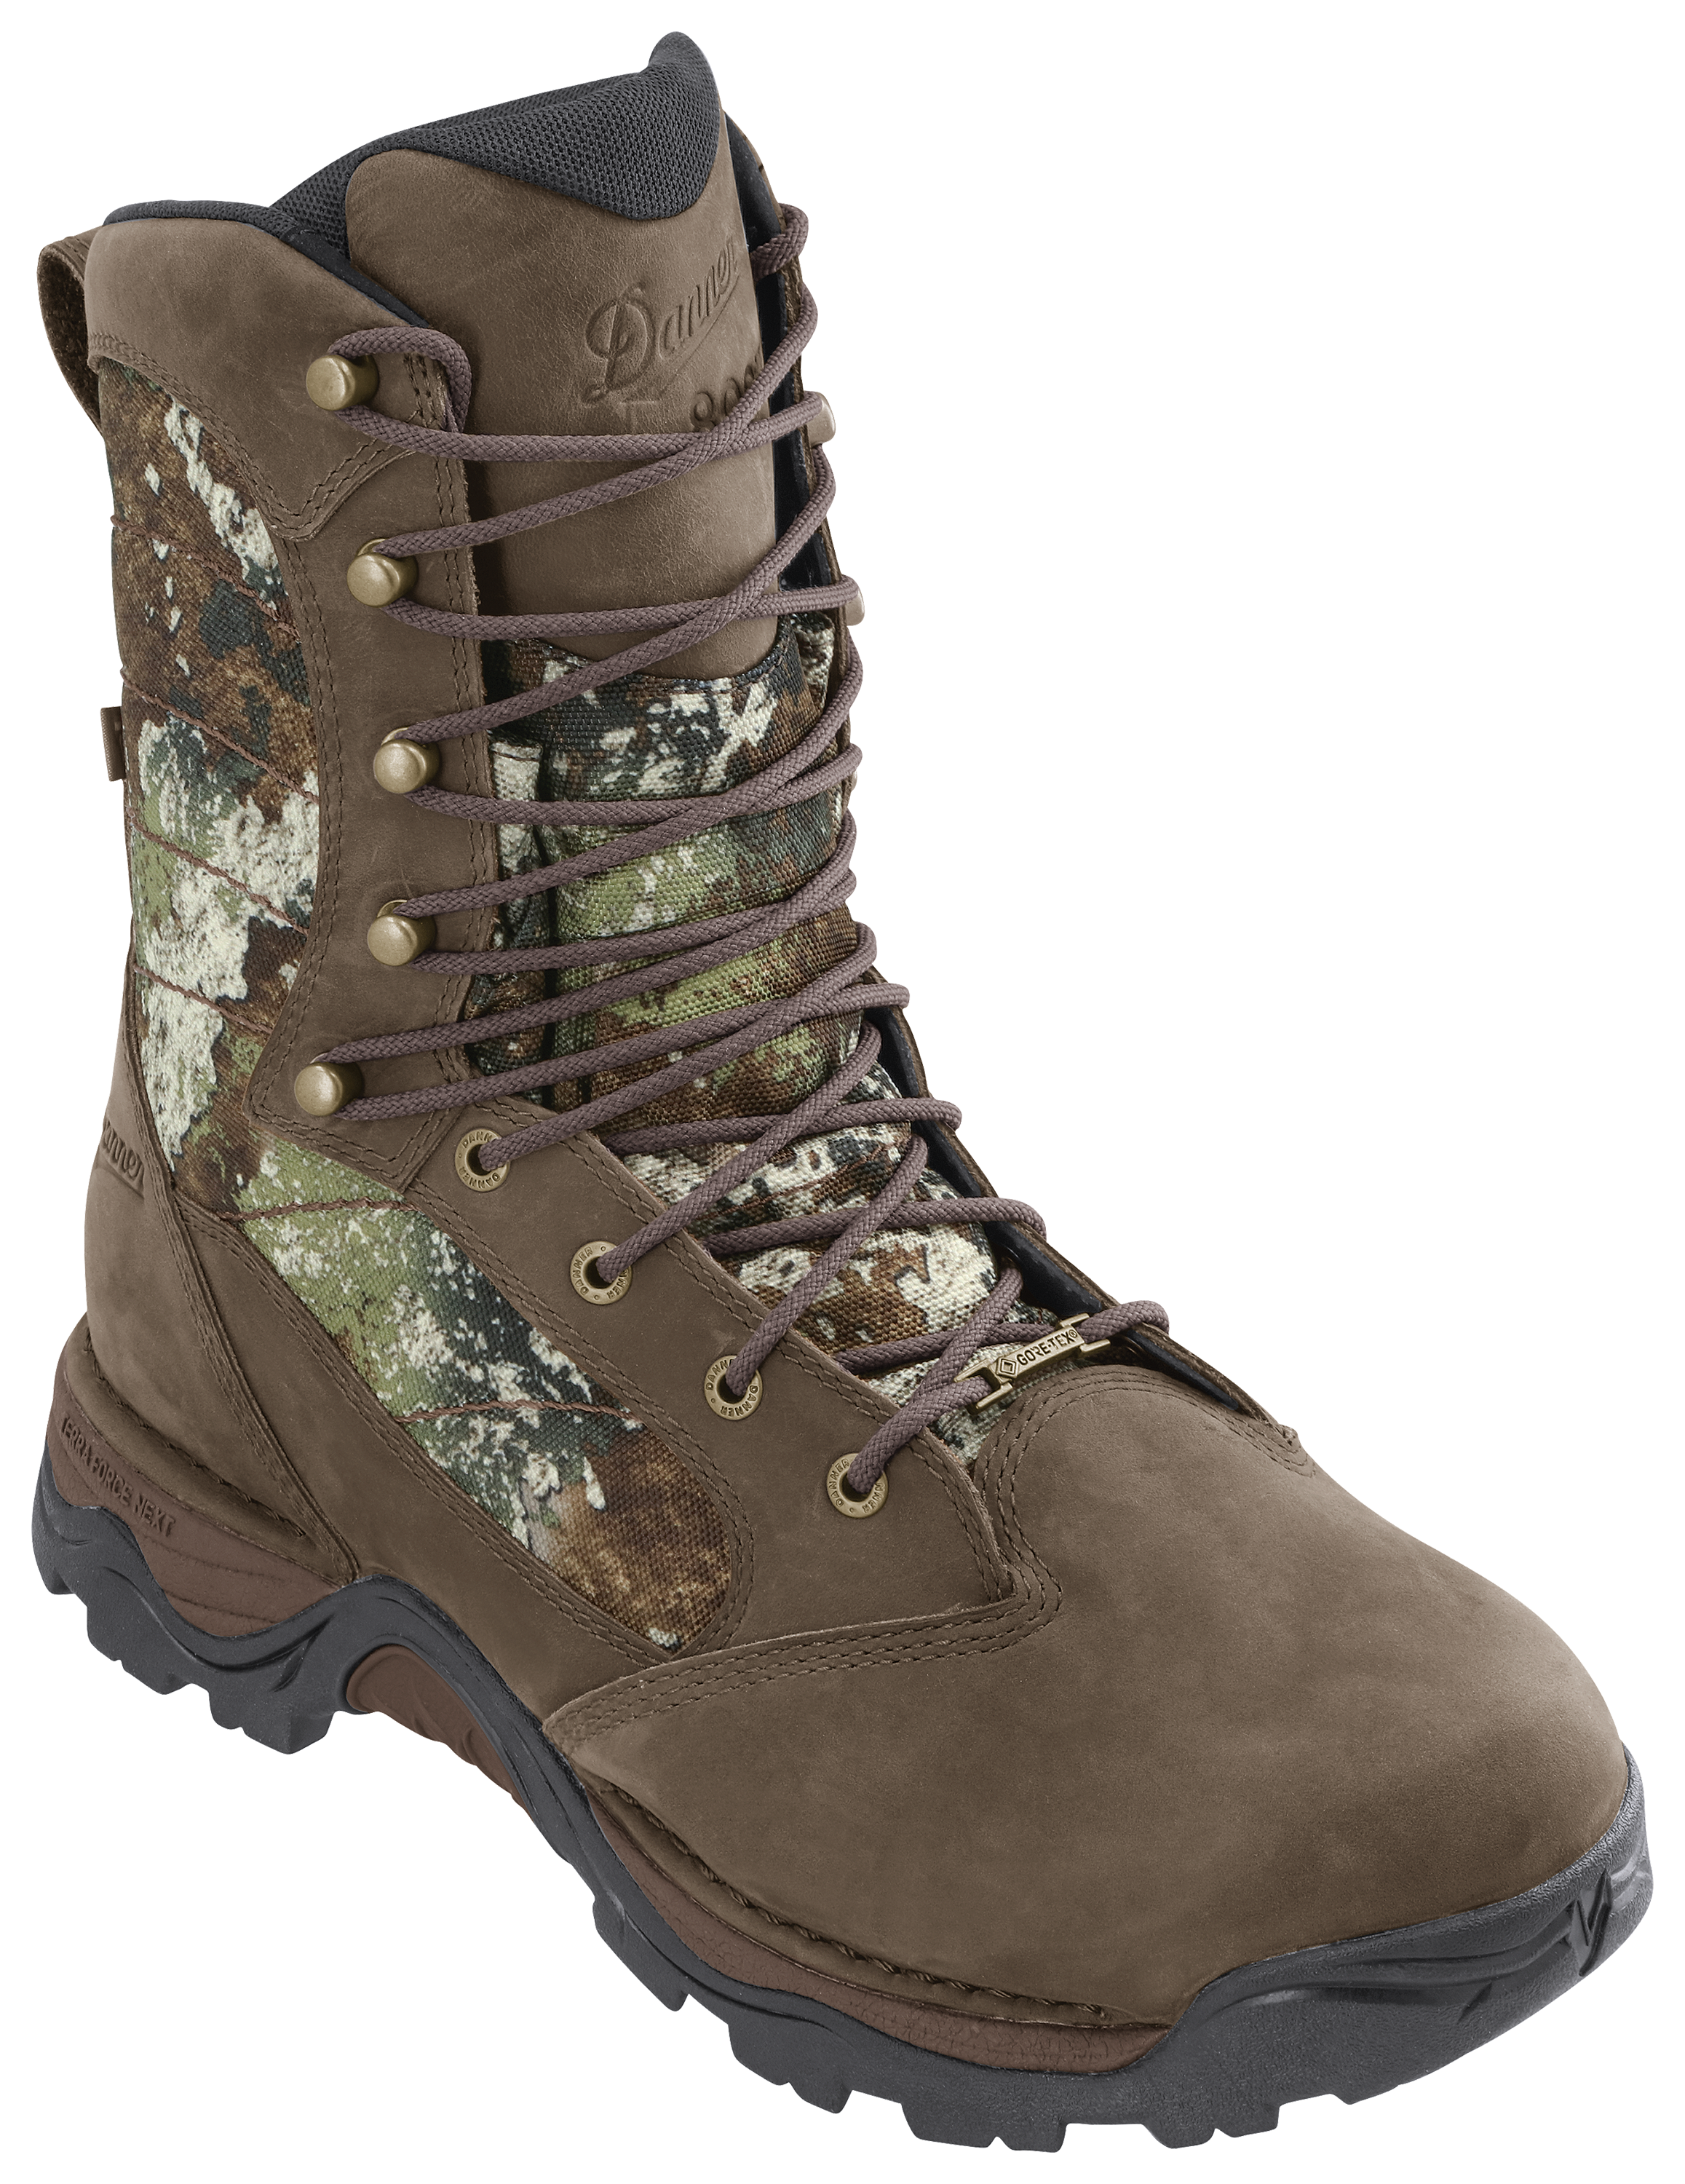 Danner Pronghorn 800 TrueTimber Strata Insulated GORE-TEX Hunting Boots for Men - 14M